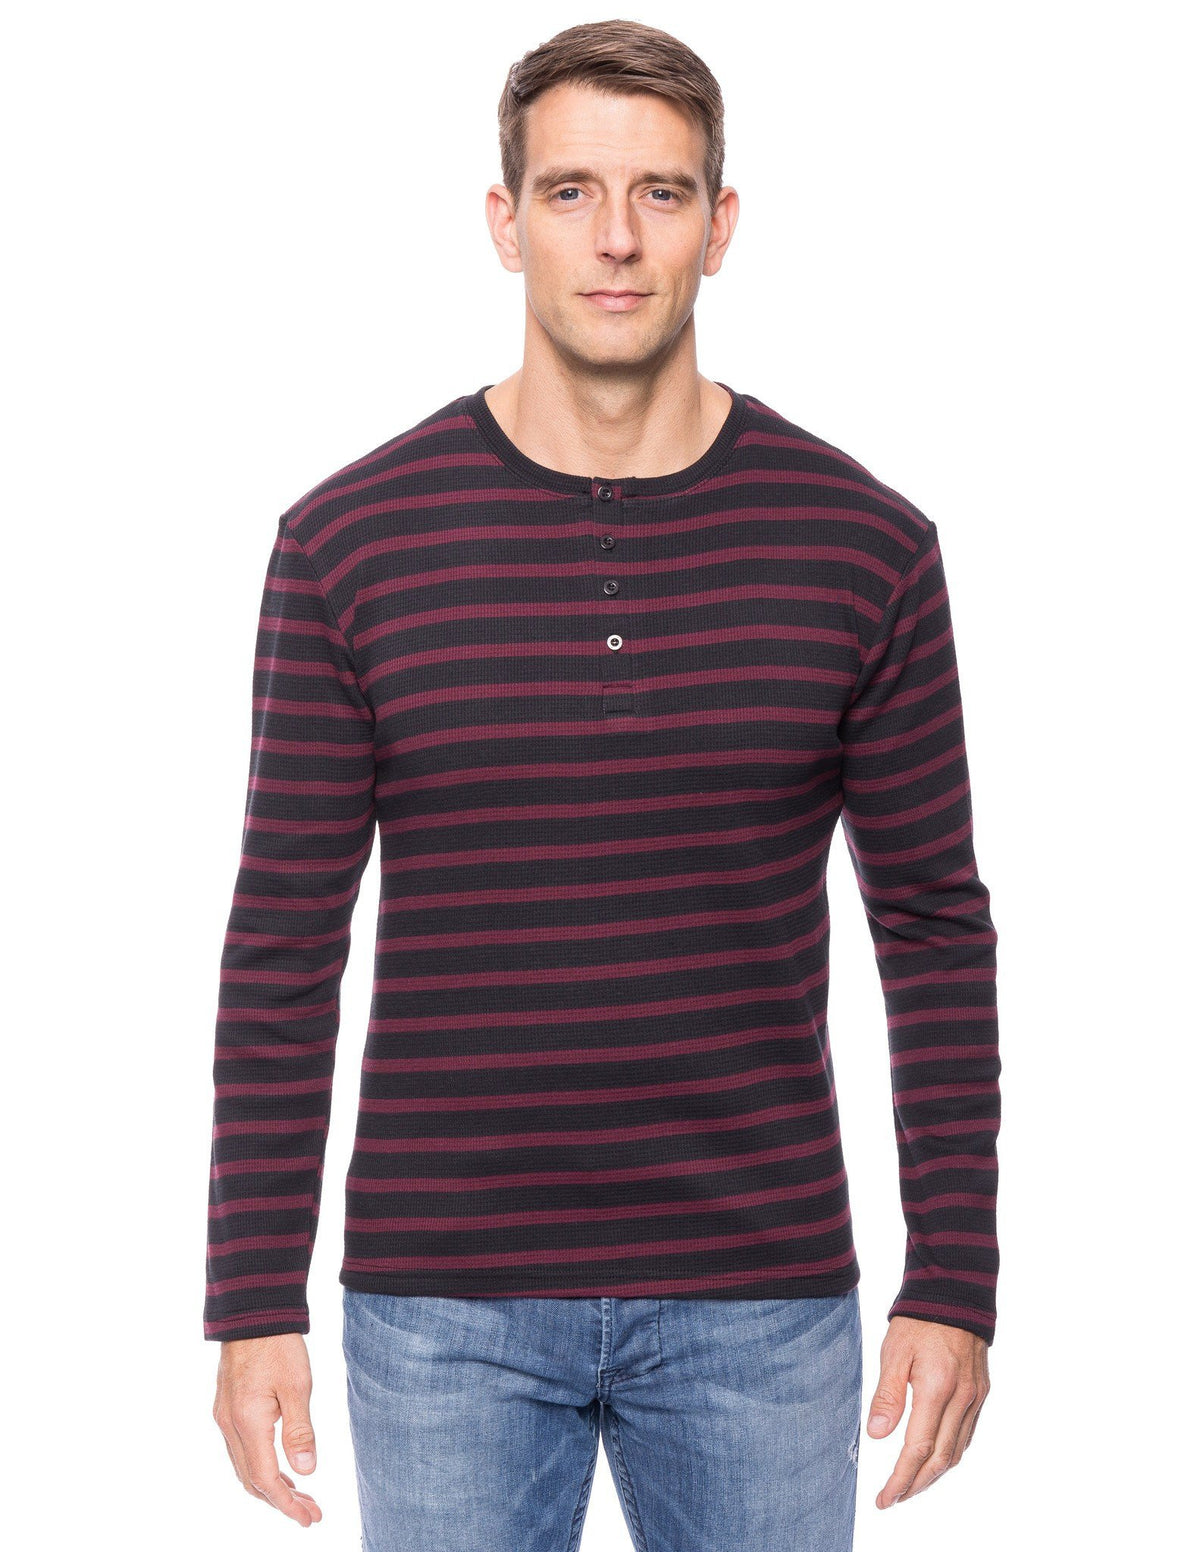 Men's Solid Thermal Henley Long Sleeve T-shirts - Stripes Black/Fig